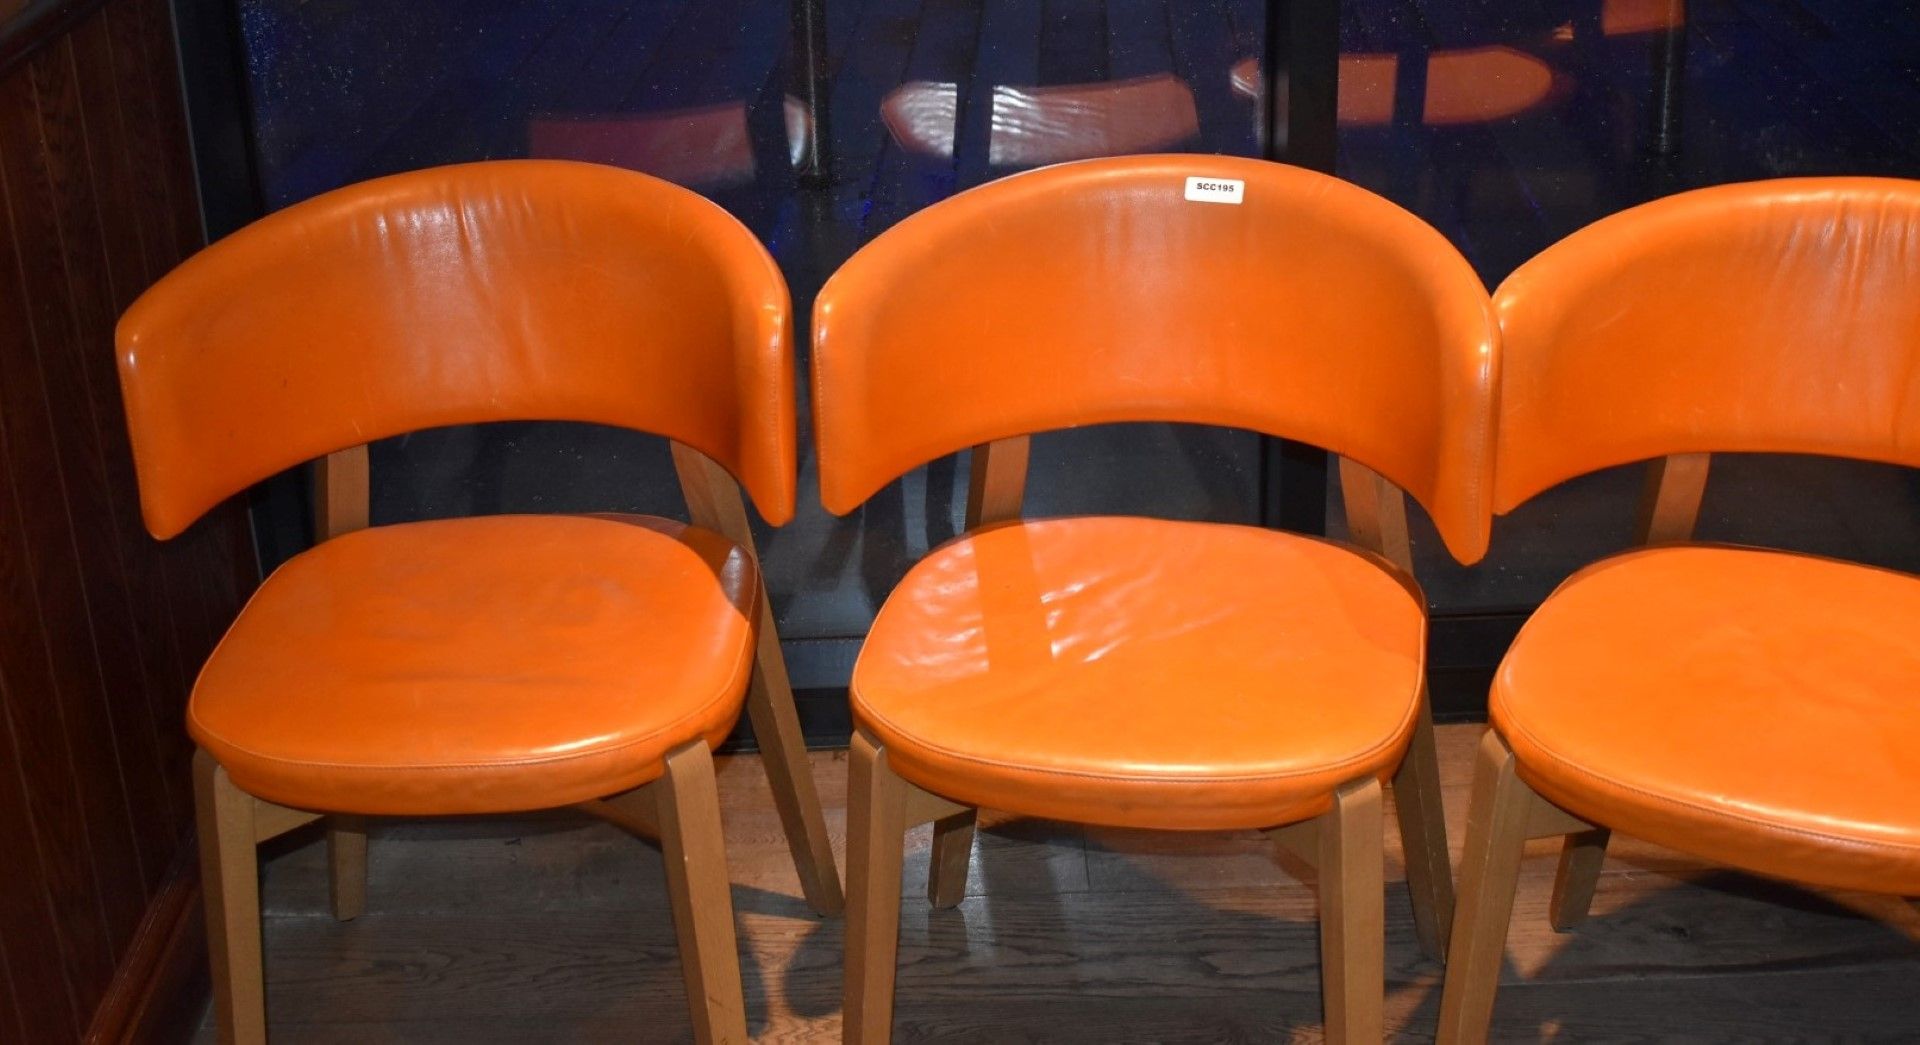 4 x Contemporary Dining Chairs With Beech Frames and Orange Leather Seat Pads and Back Rests - Image 3 of 4